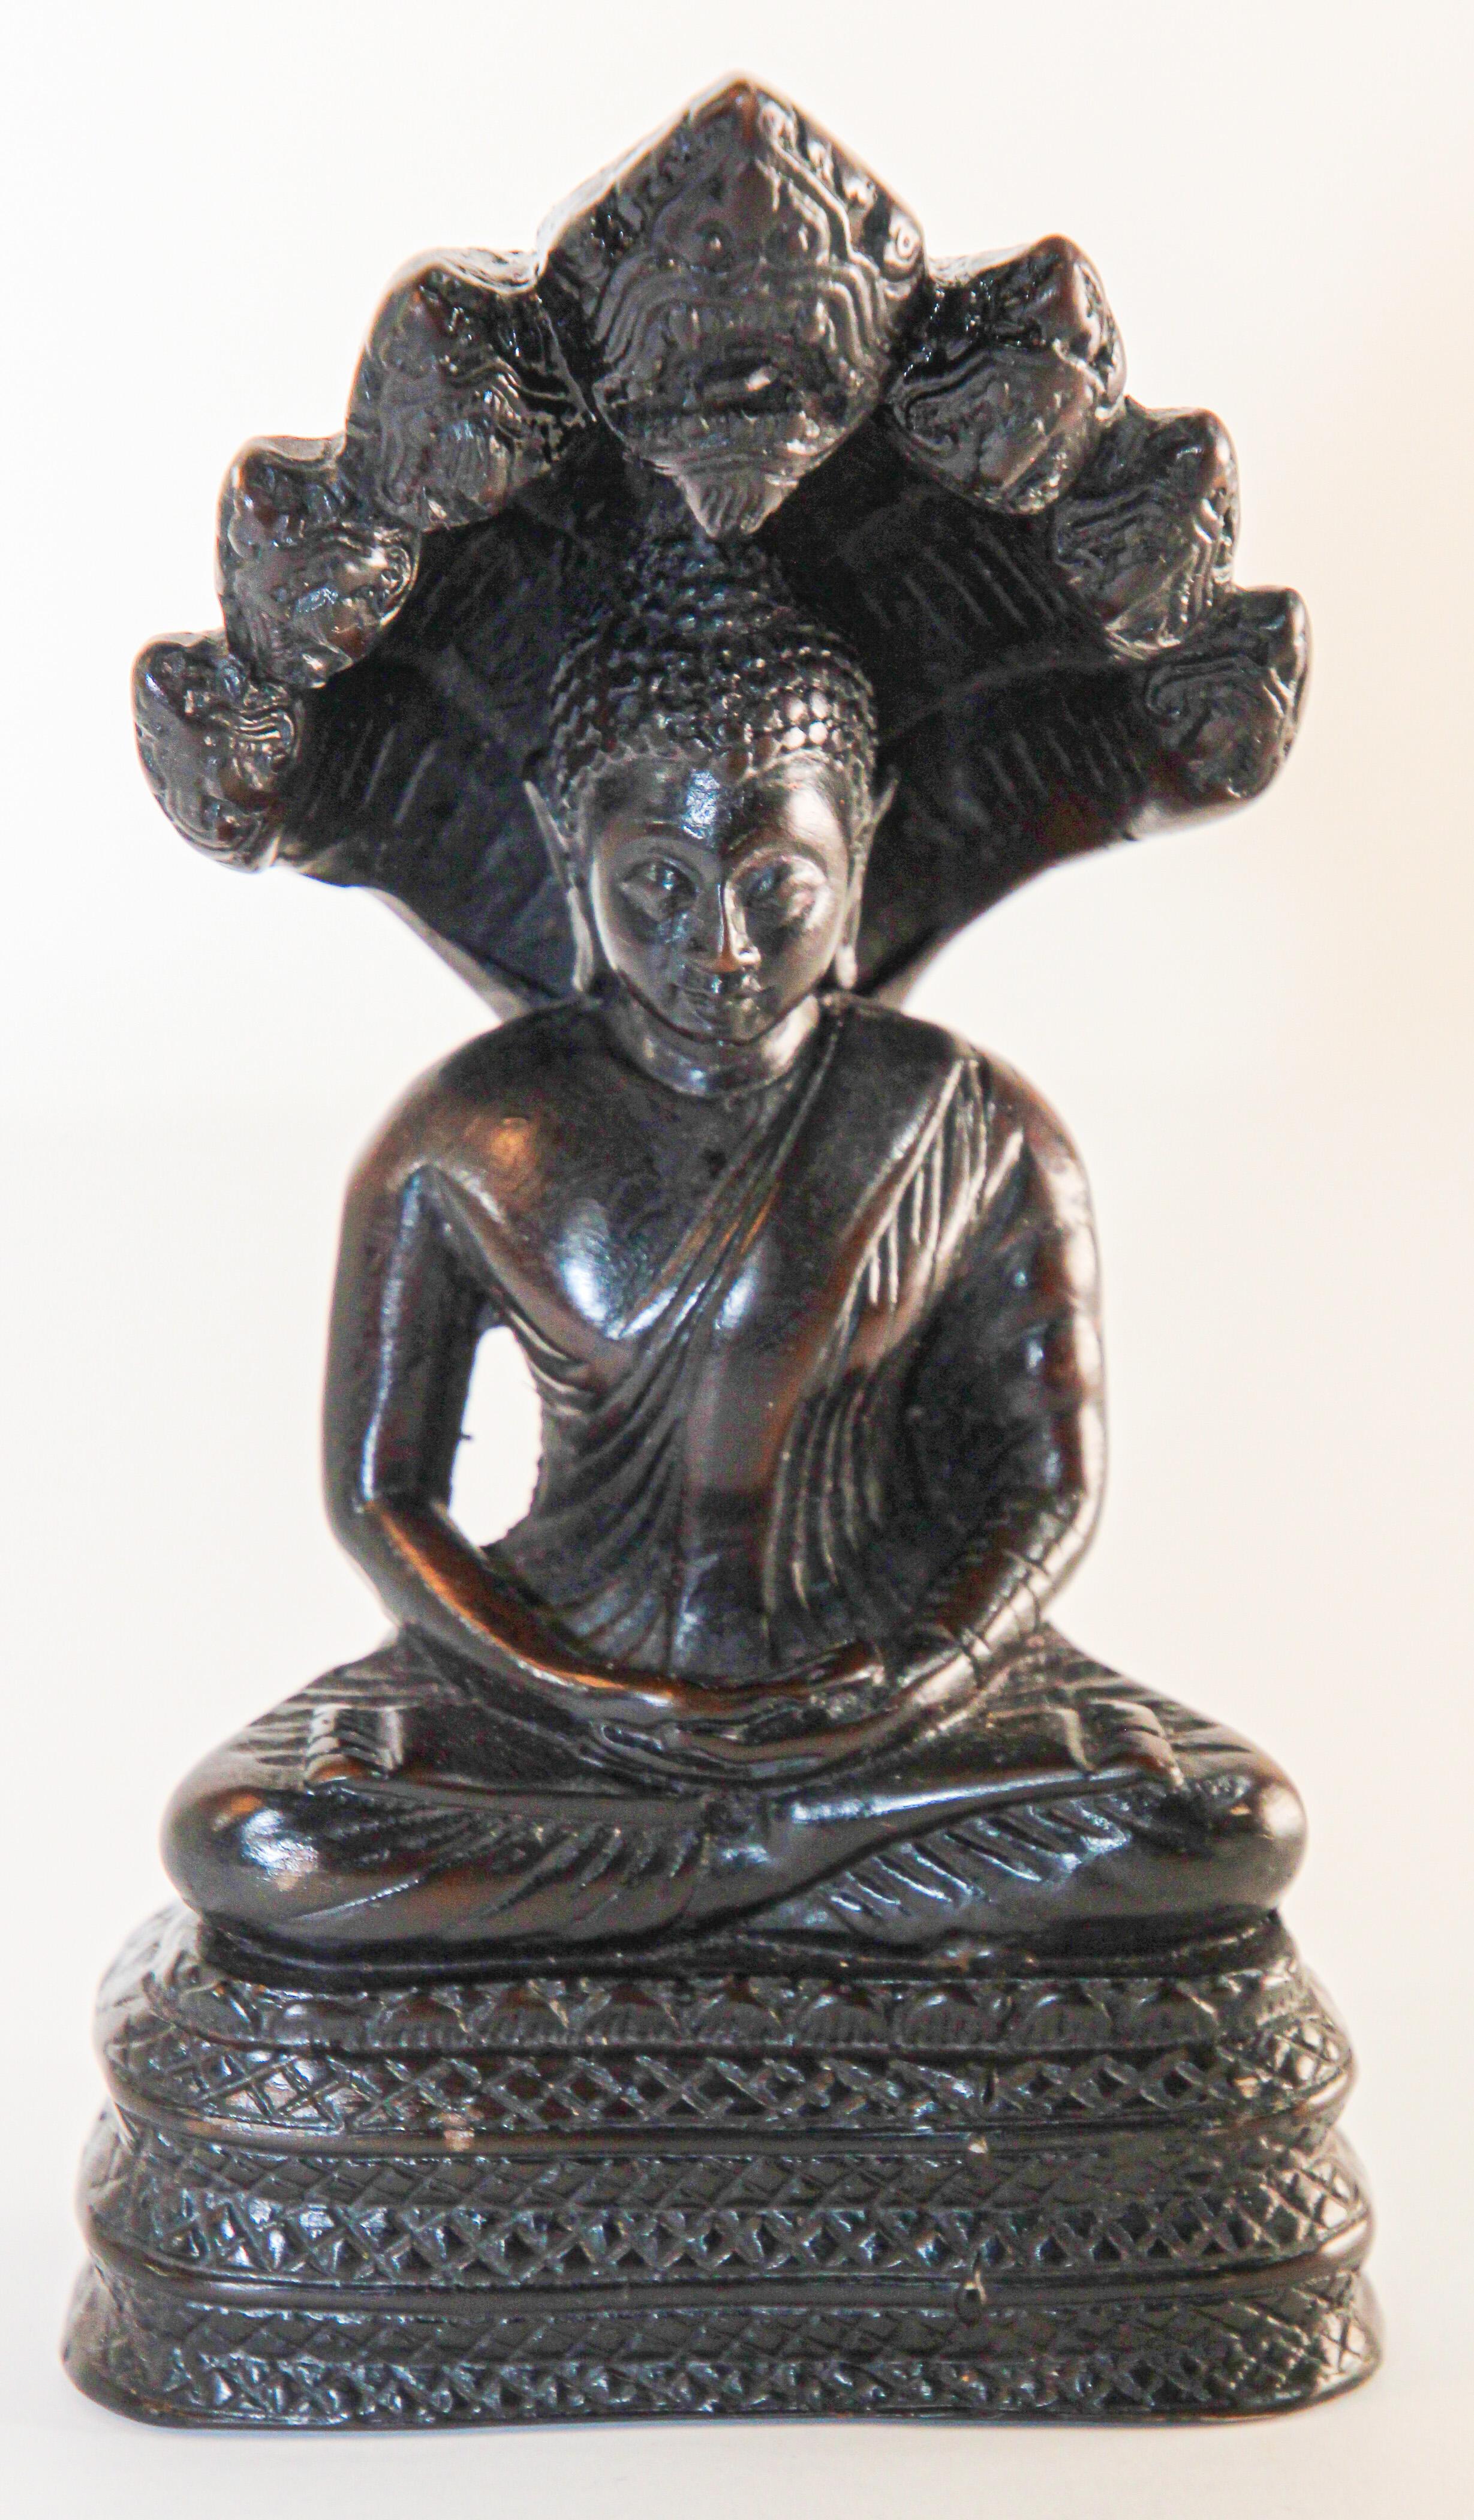 Vintage Naga Meditating Buddha Statue.
In Buddhism and Hinduism, Naga is the Sanskrit word for a deity taking the form of a very large snake, specifically the king cobra with multiple heads.
Vintage Mid century Hindu art of a peaceful Naga